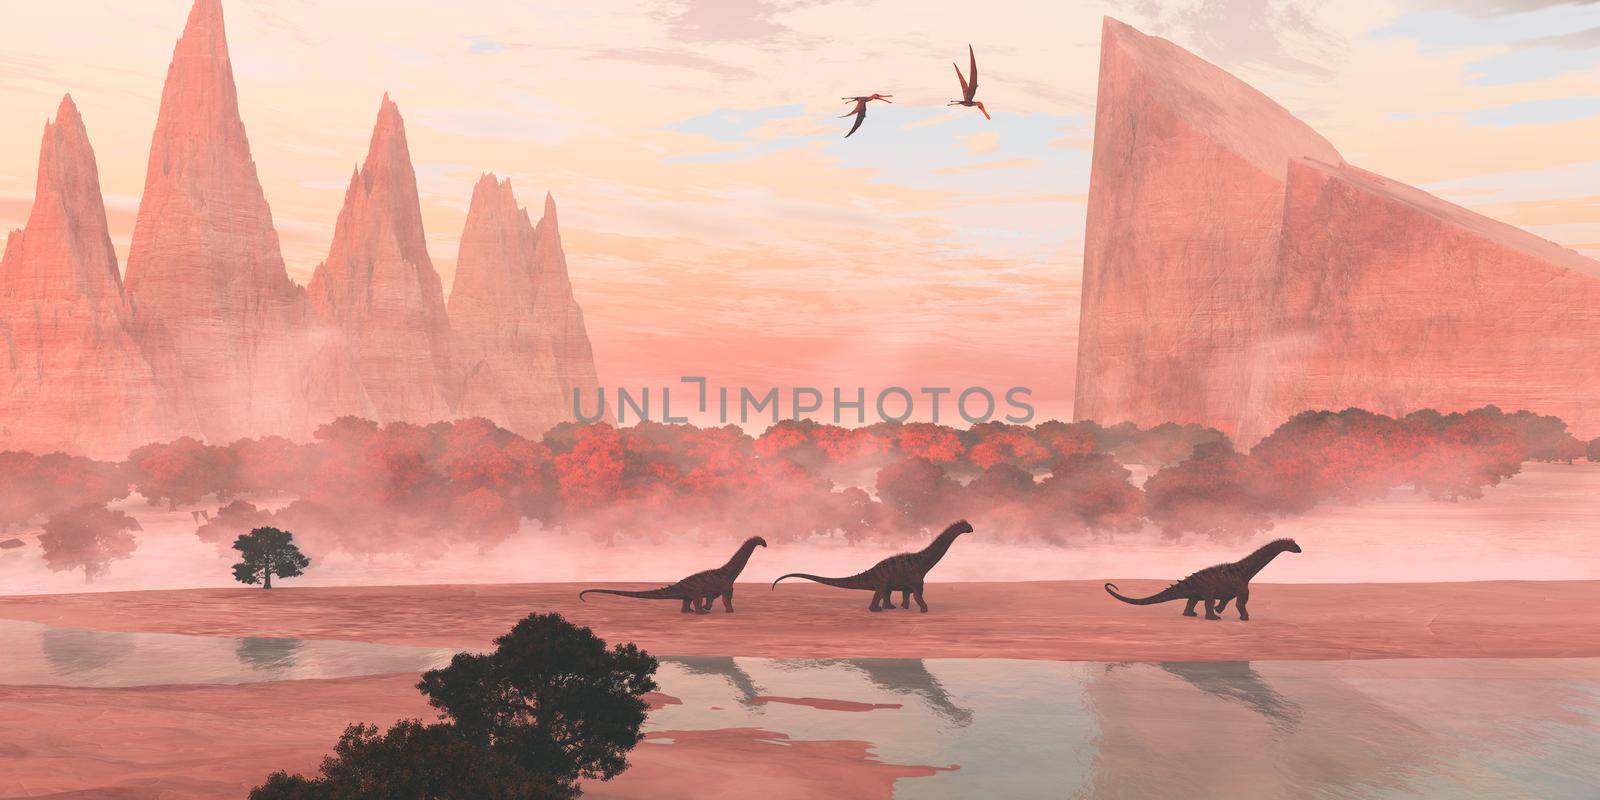 Anhanguera Pterosaurs fly over Alamosaurus sauropod dinosaurs walking along the banks of a river during the Cretaceous Period.